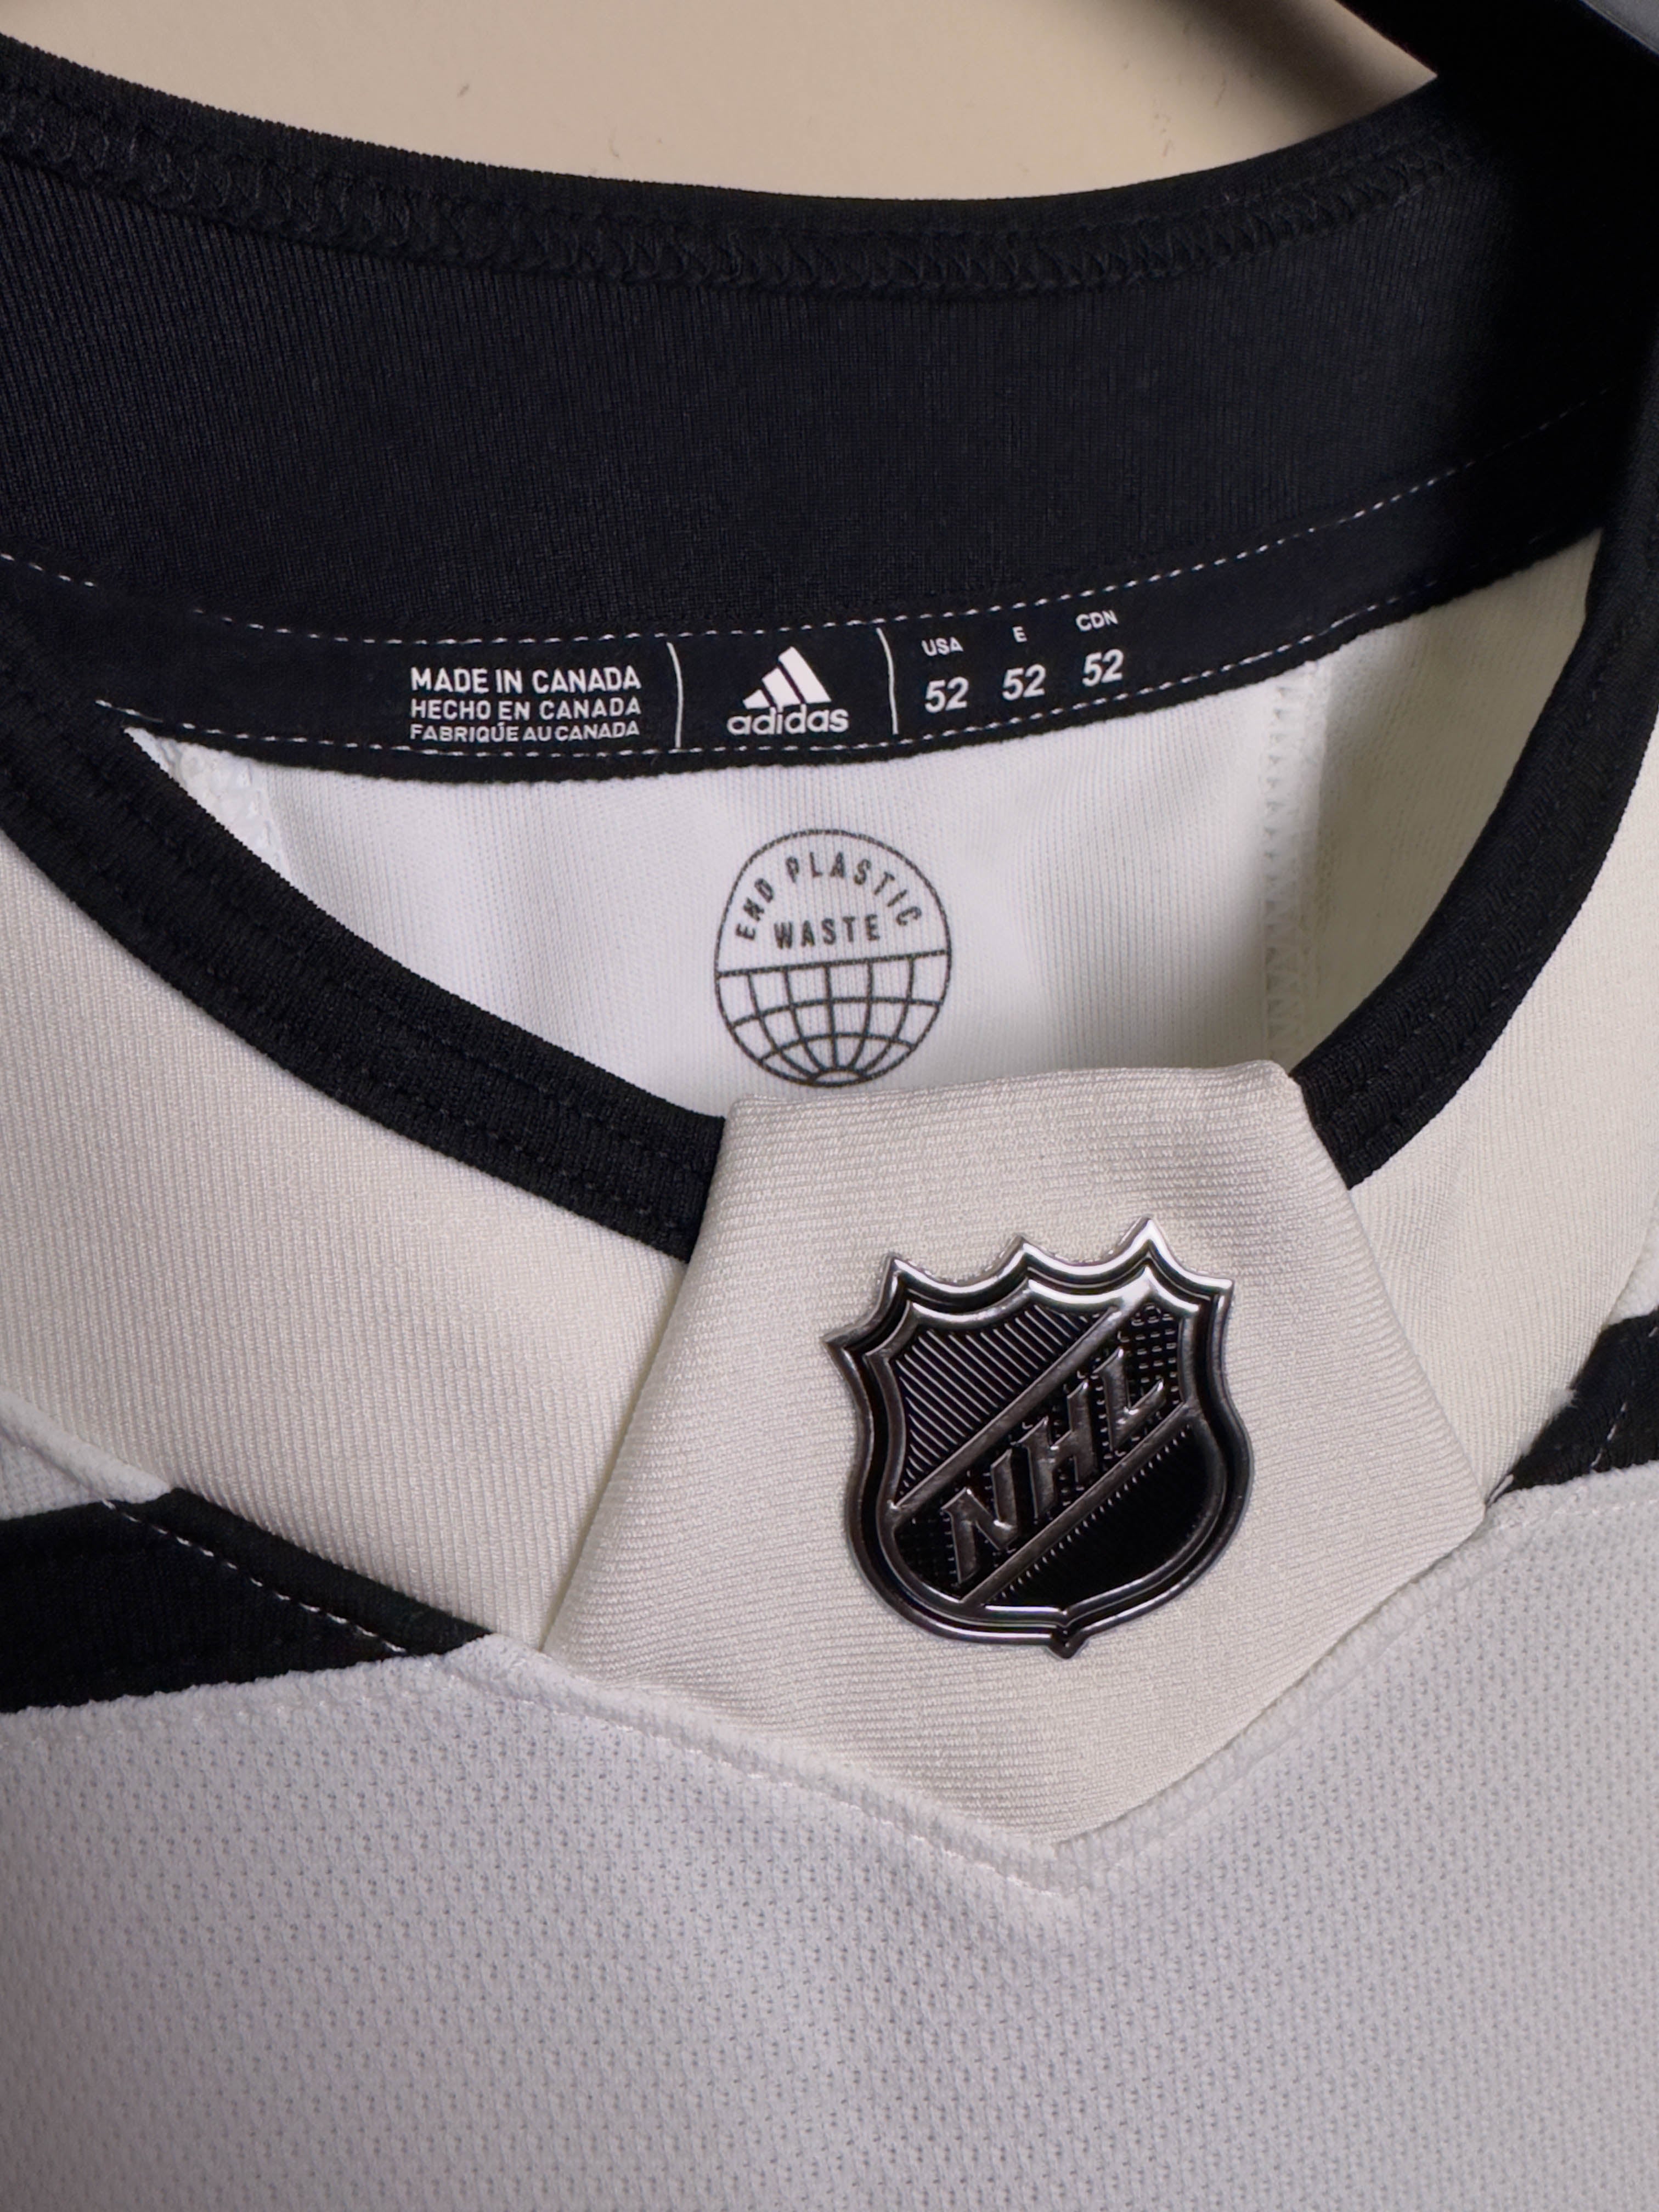 Los Angeles Kings NHL Adidas MiC Team Issued Alternate Jersey Size